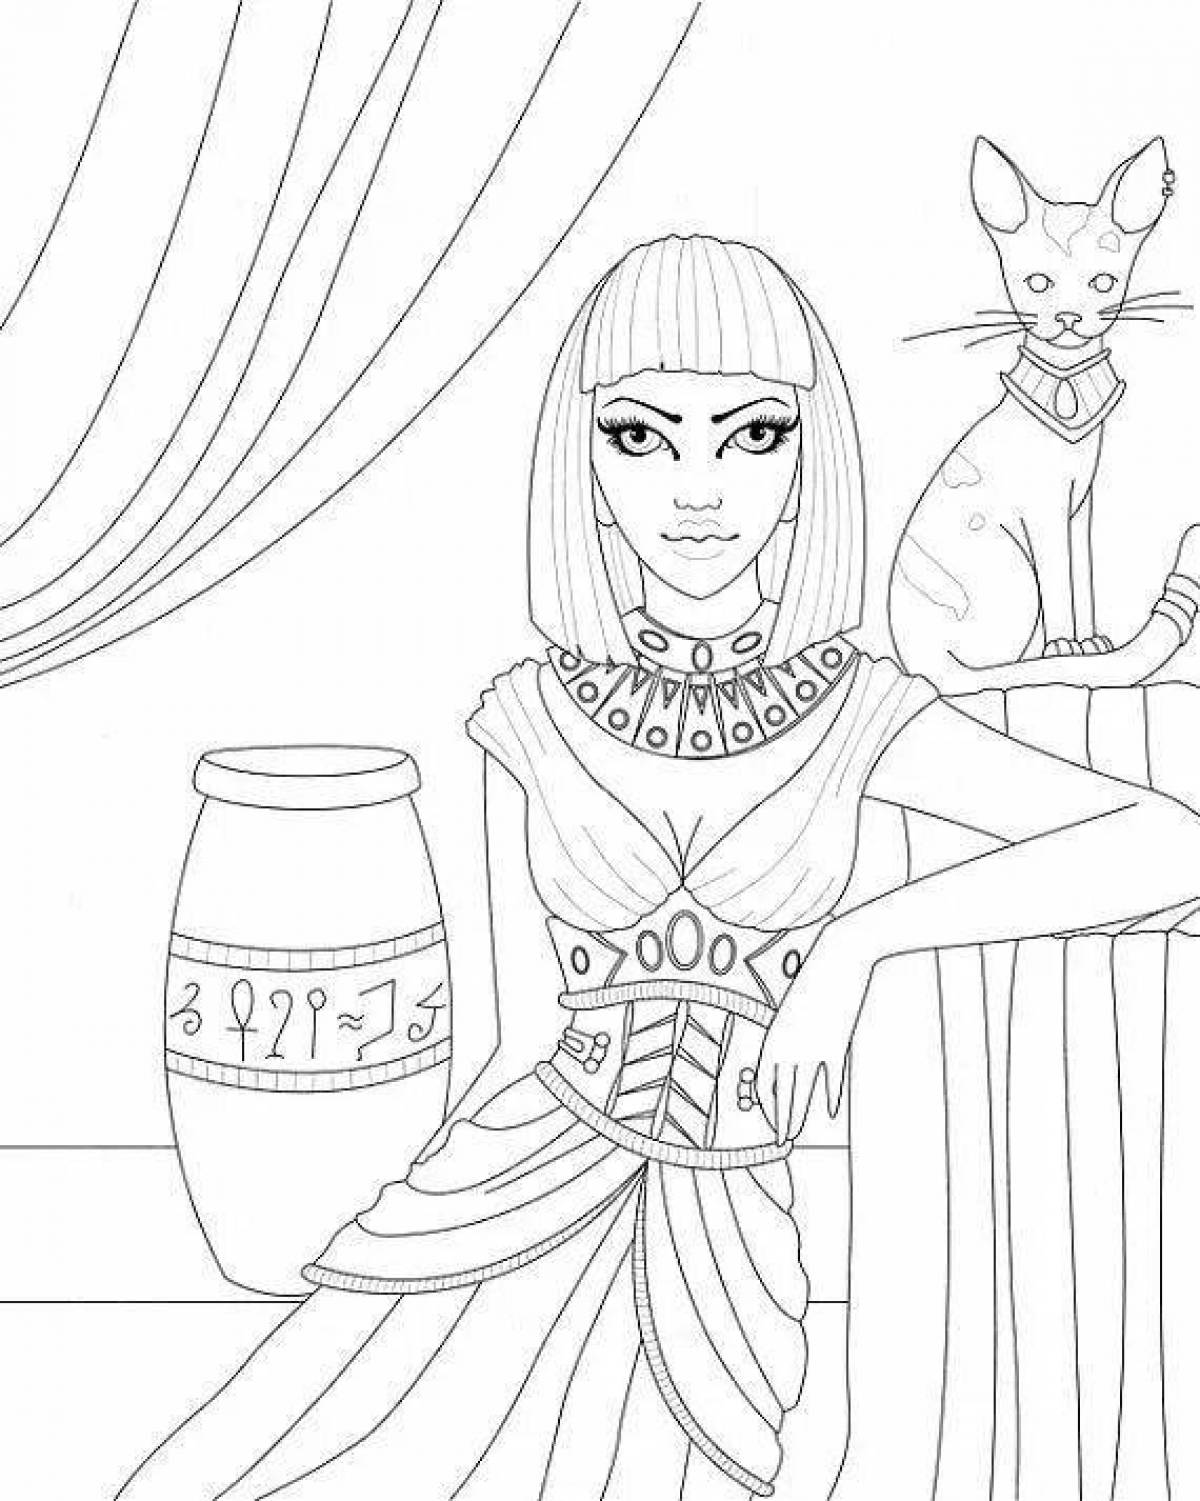 Glittering Egyptian cat coloring page